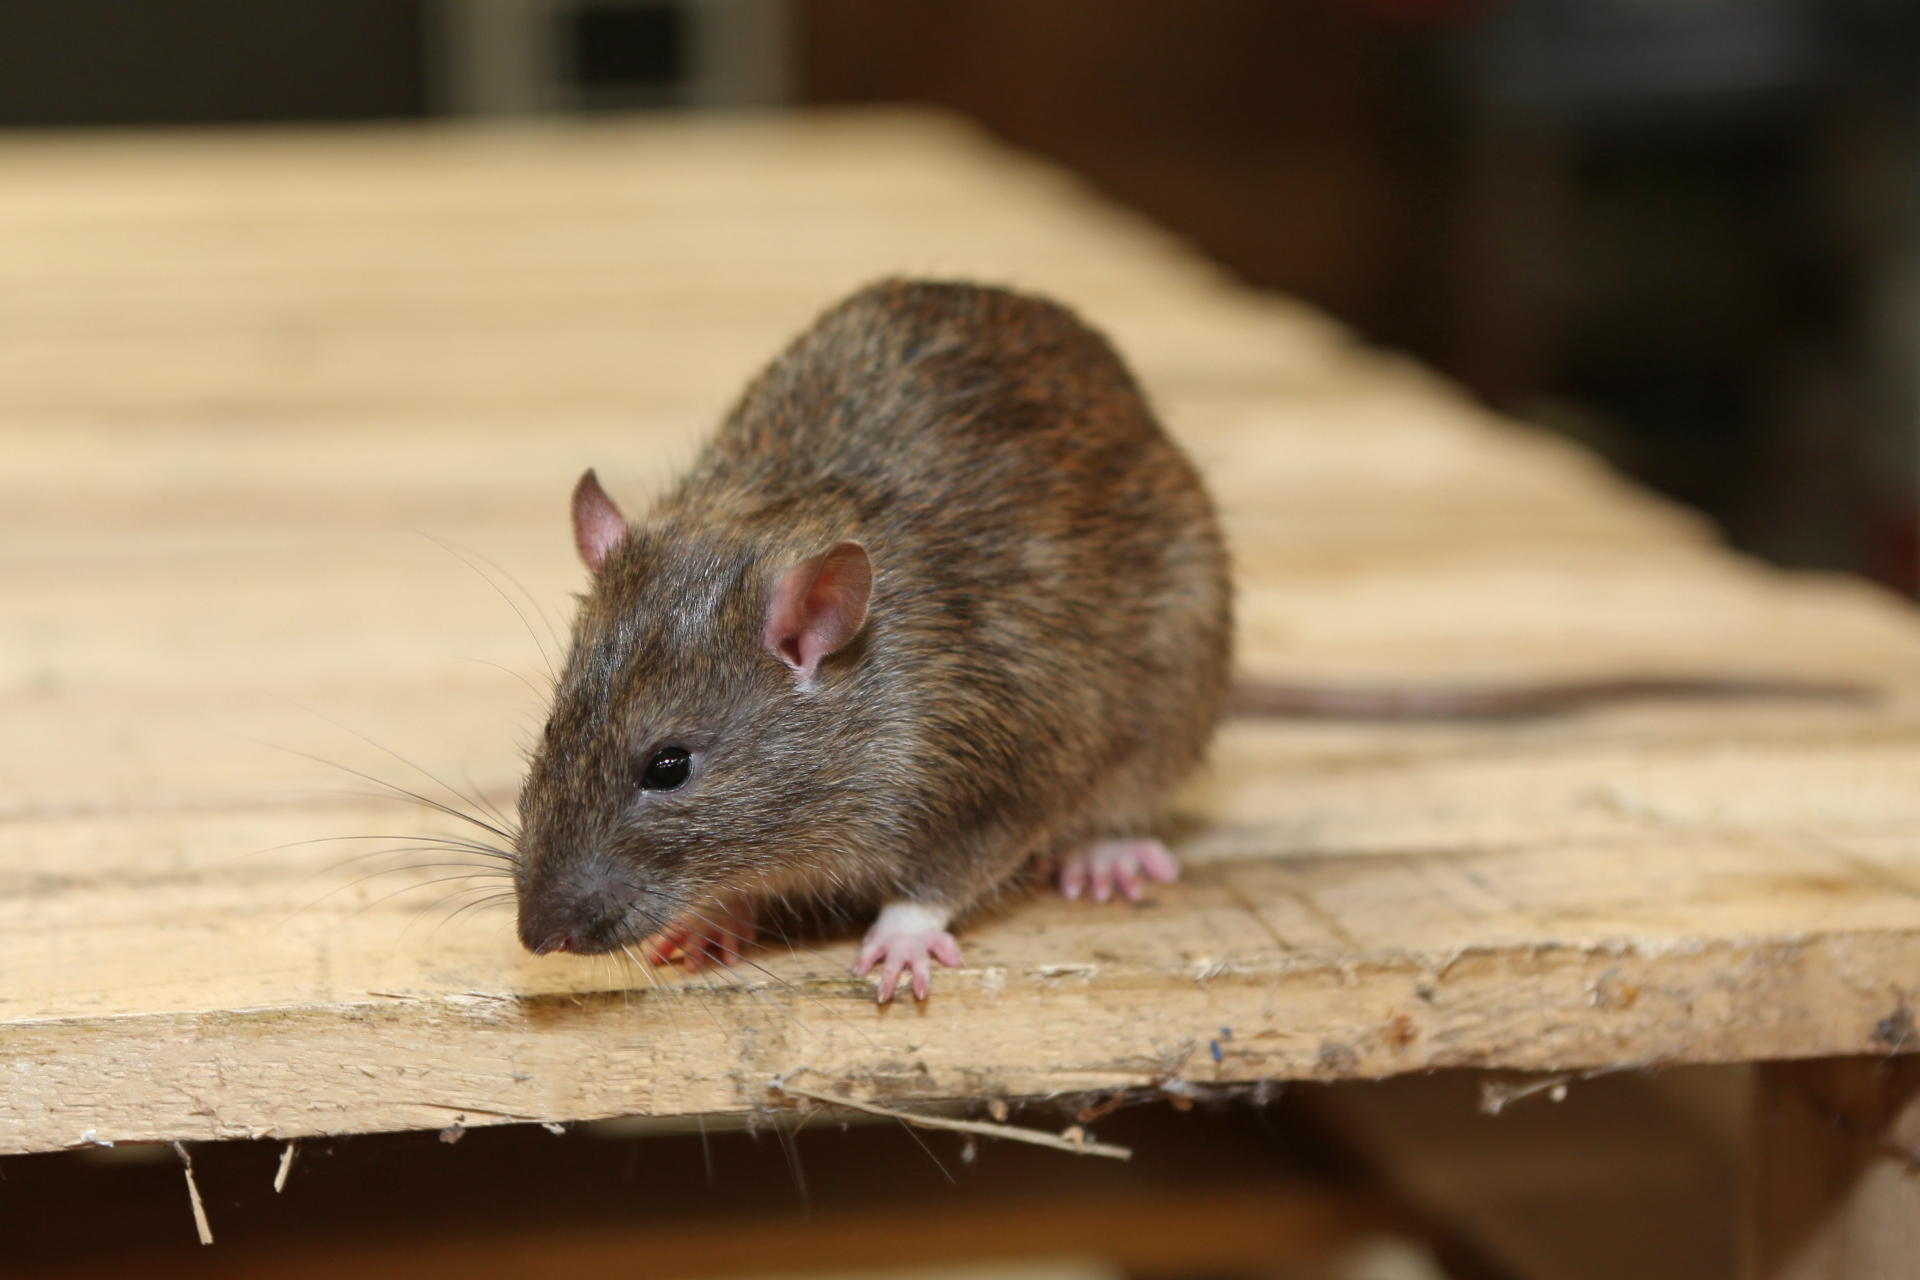 Rat Control, Pest Control in Catford, Hither Green, SE6. Call Now 020 8166 9746